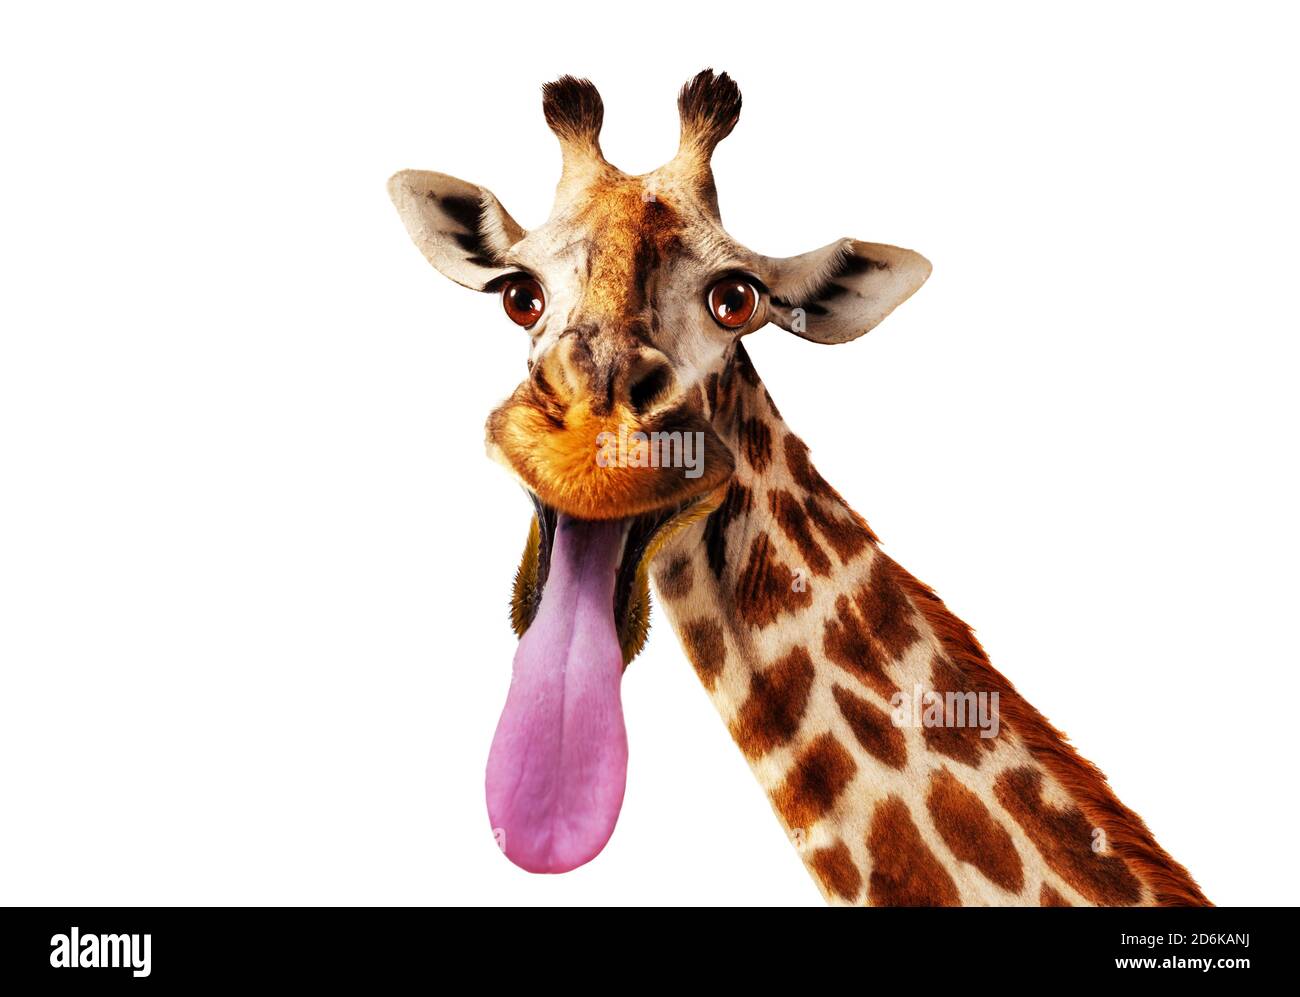 Funny close-up photo of giraffe head stick out longue tongue isolated on white Stock Photo